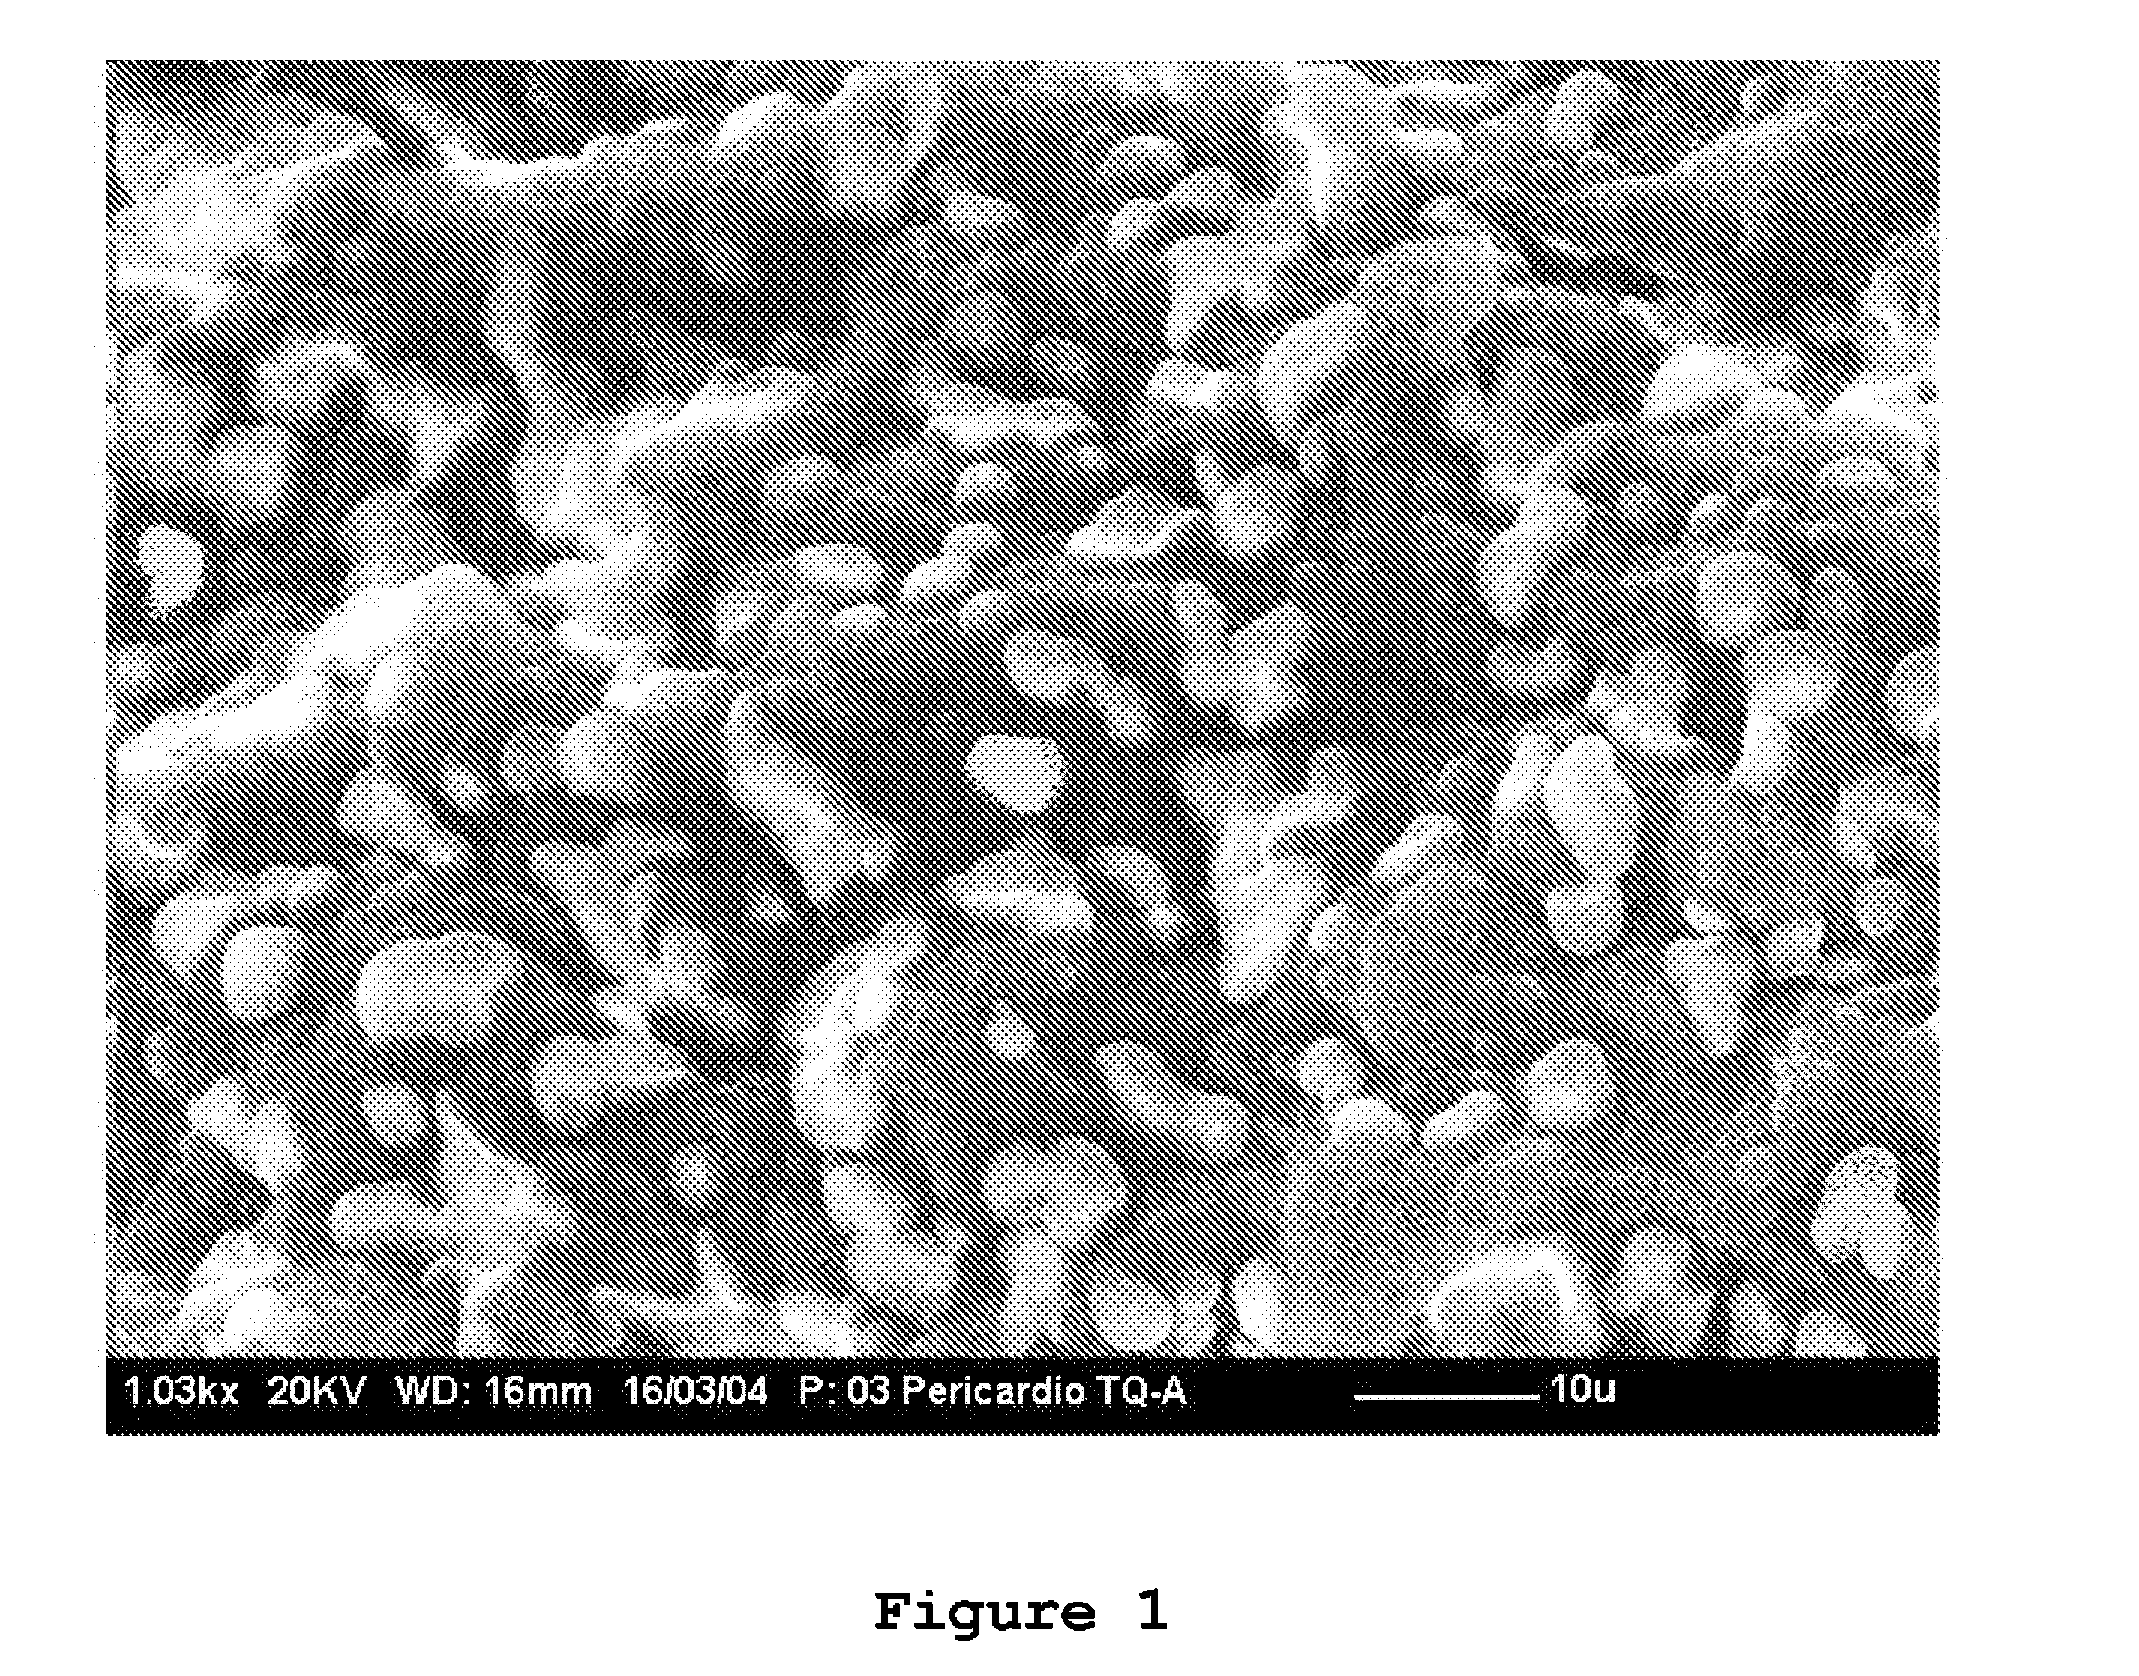 Method of preparing acellularized, biocompatible, implantable material